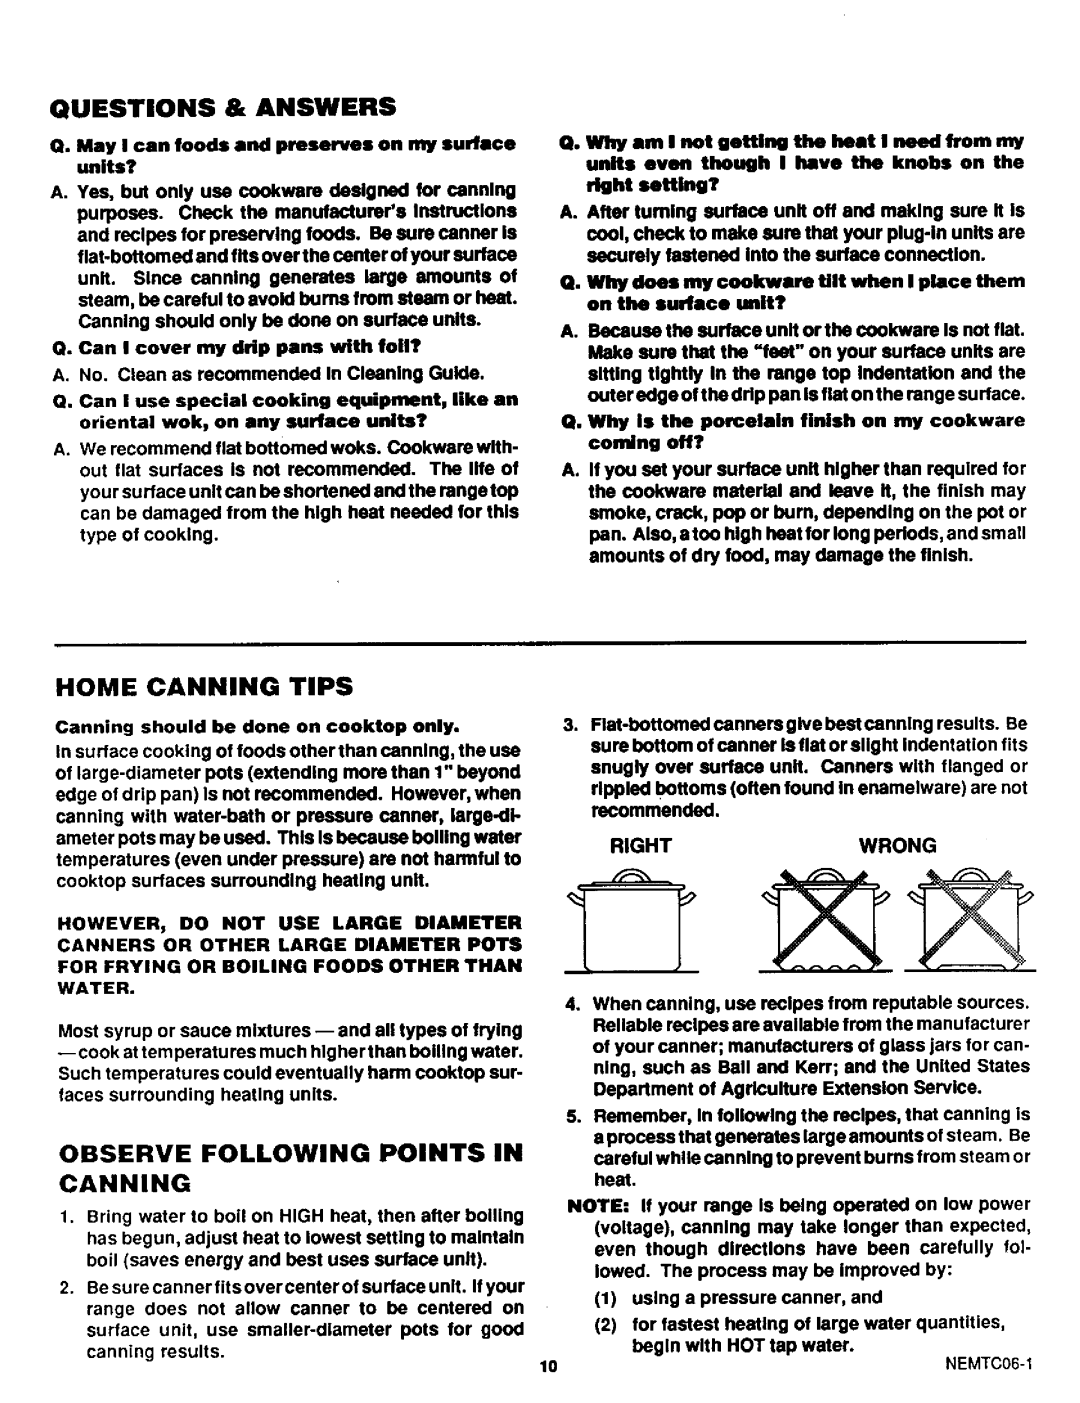 Sears 46521, 46525, 46520 warranty Questions & Answers, Home Canning Tips, Observe Following Points In Canning 